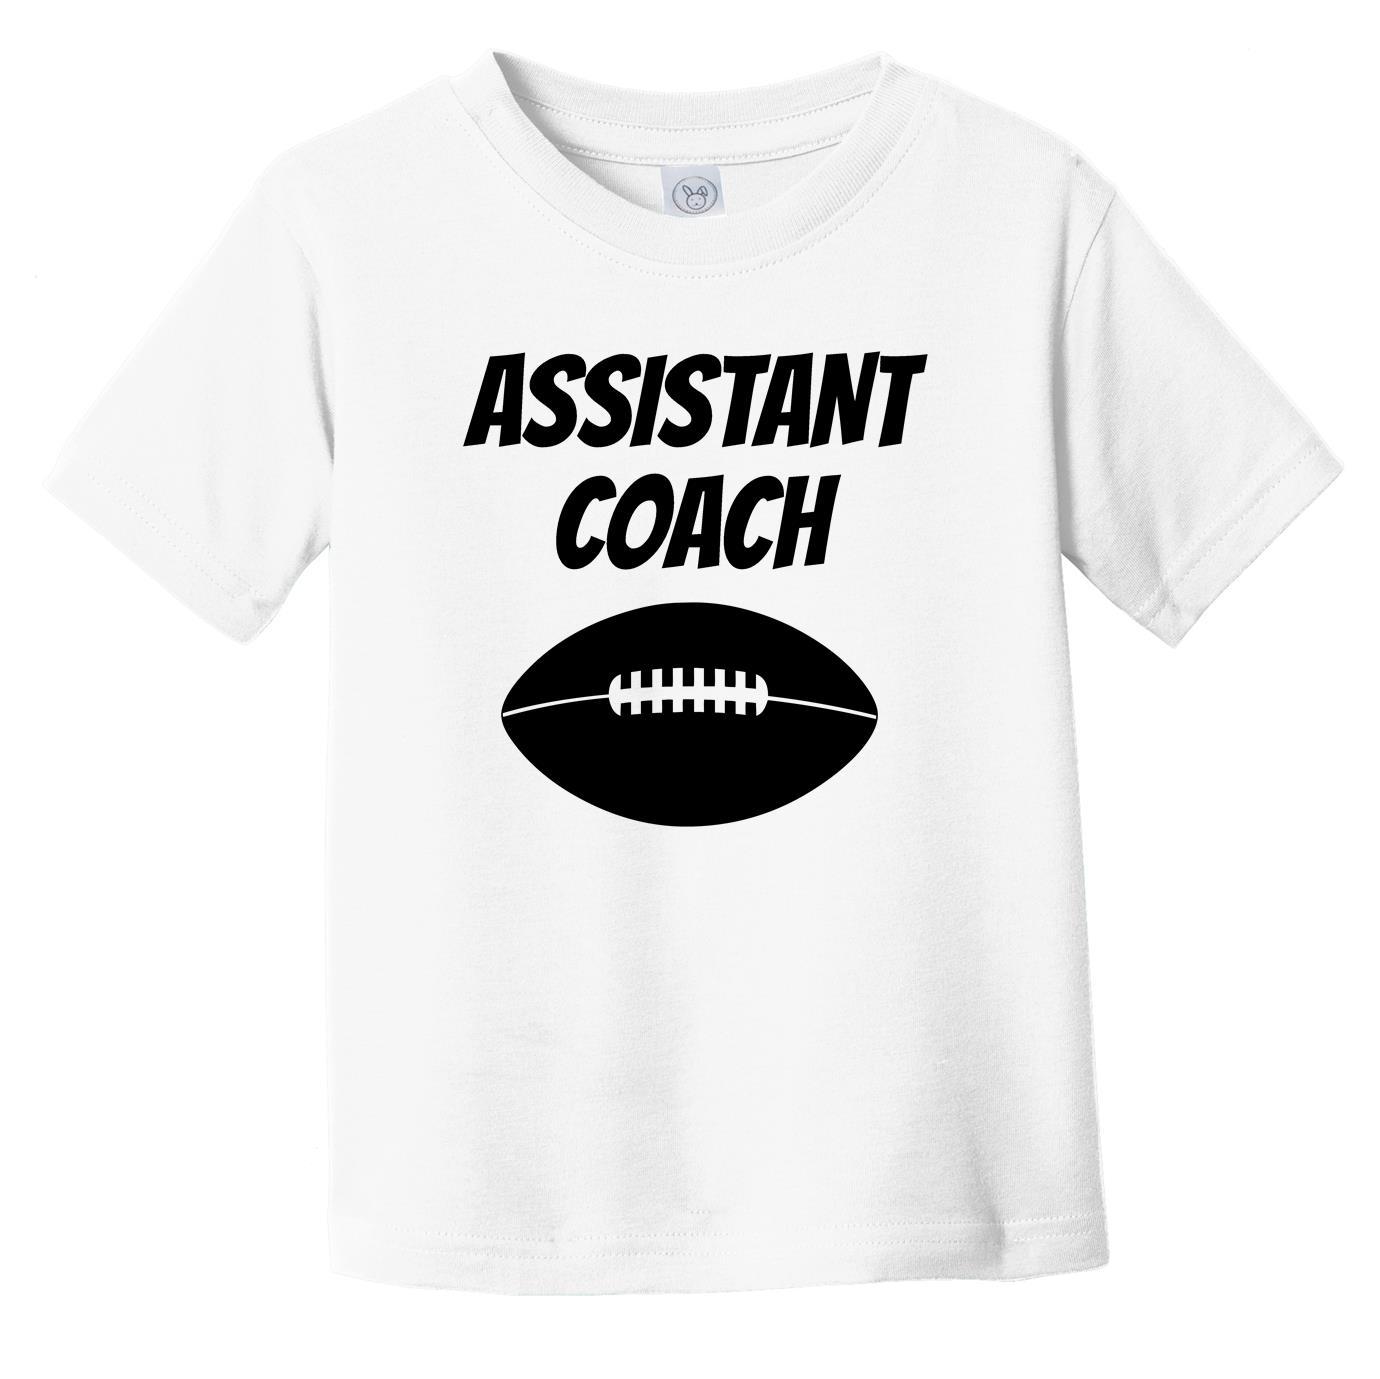 Assistant Coach Funny Infant Toddler T-Shirt For Football Coach's Son Or Daughter